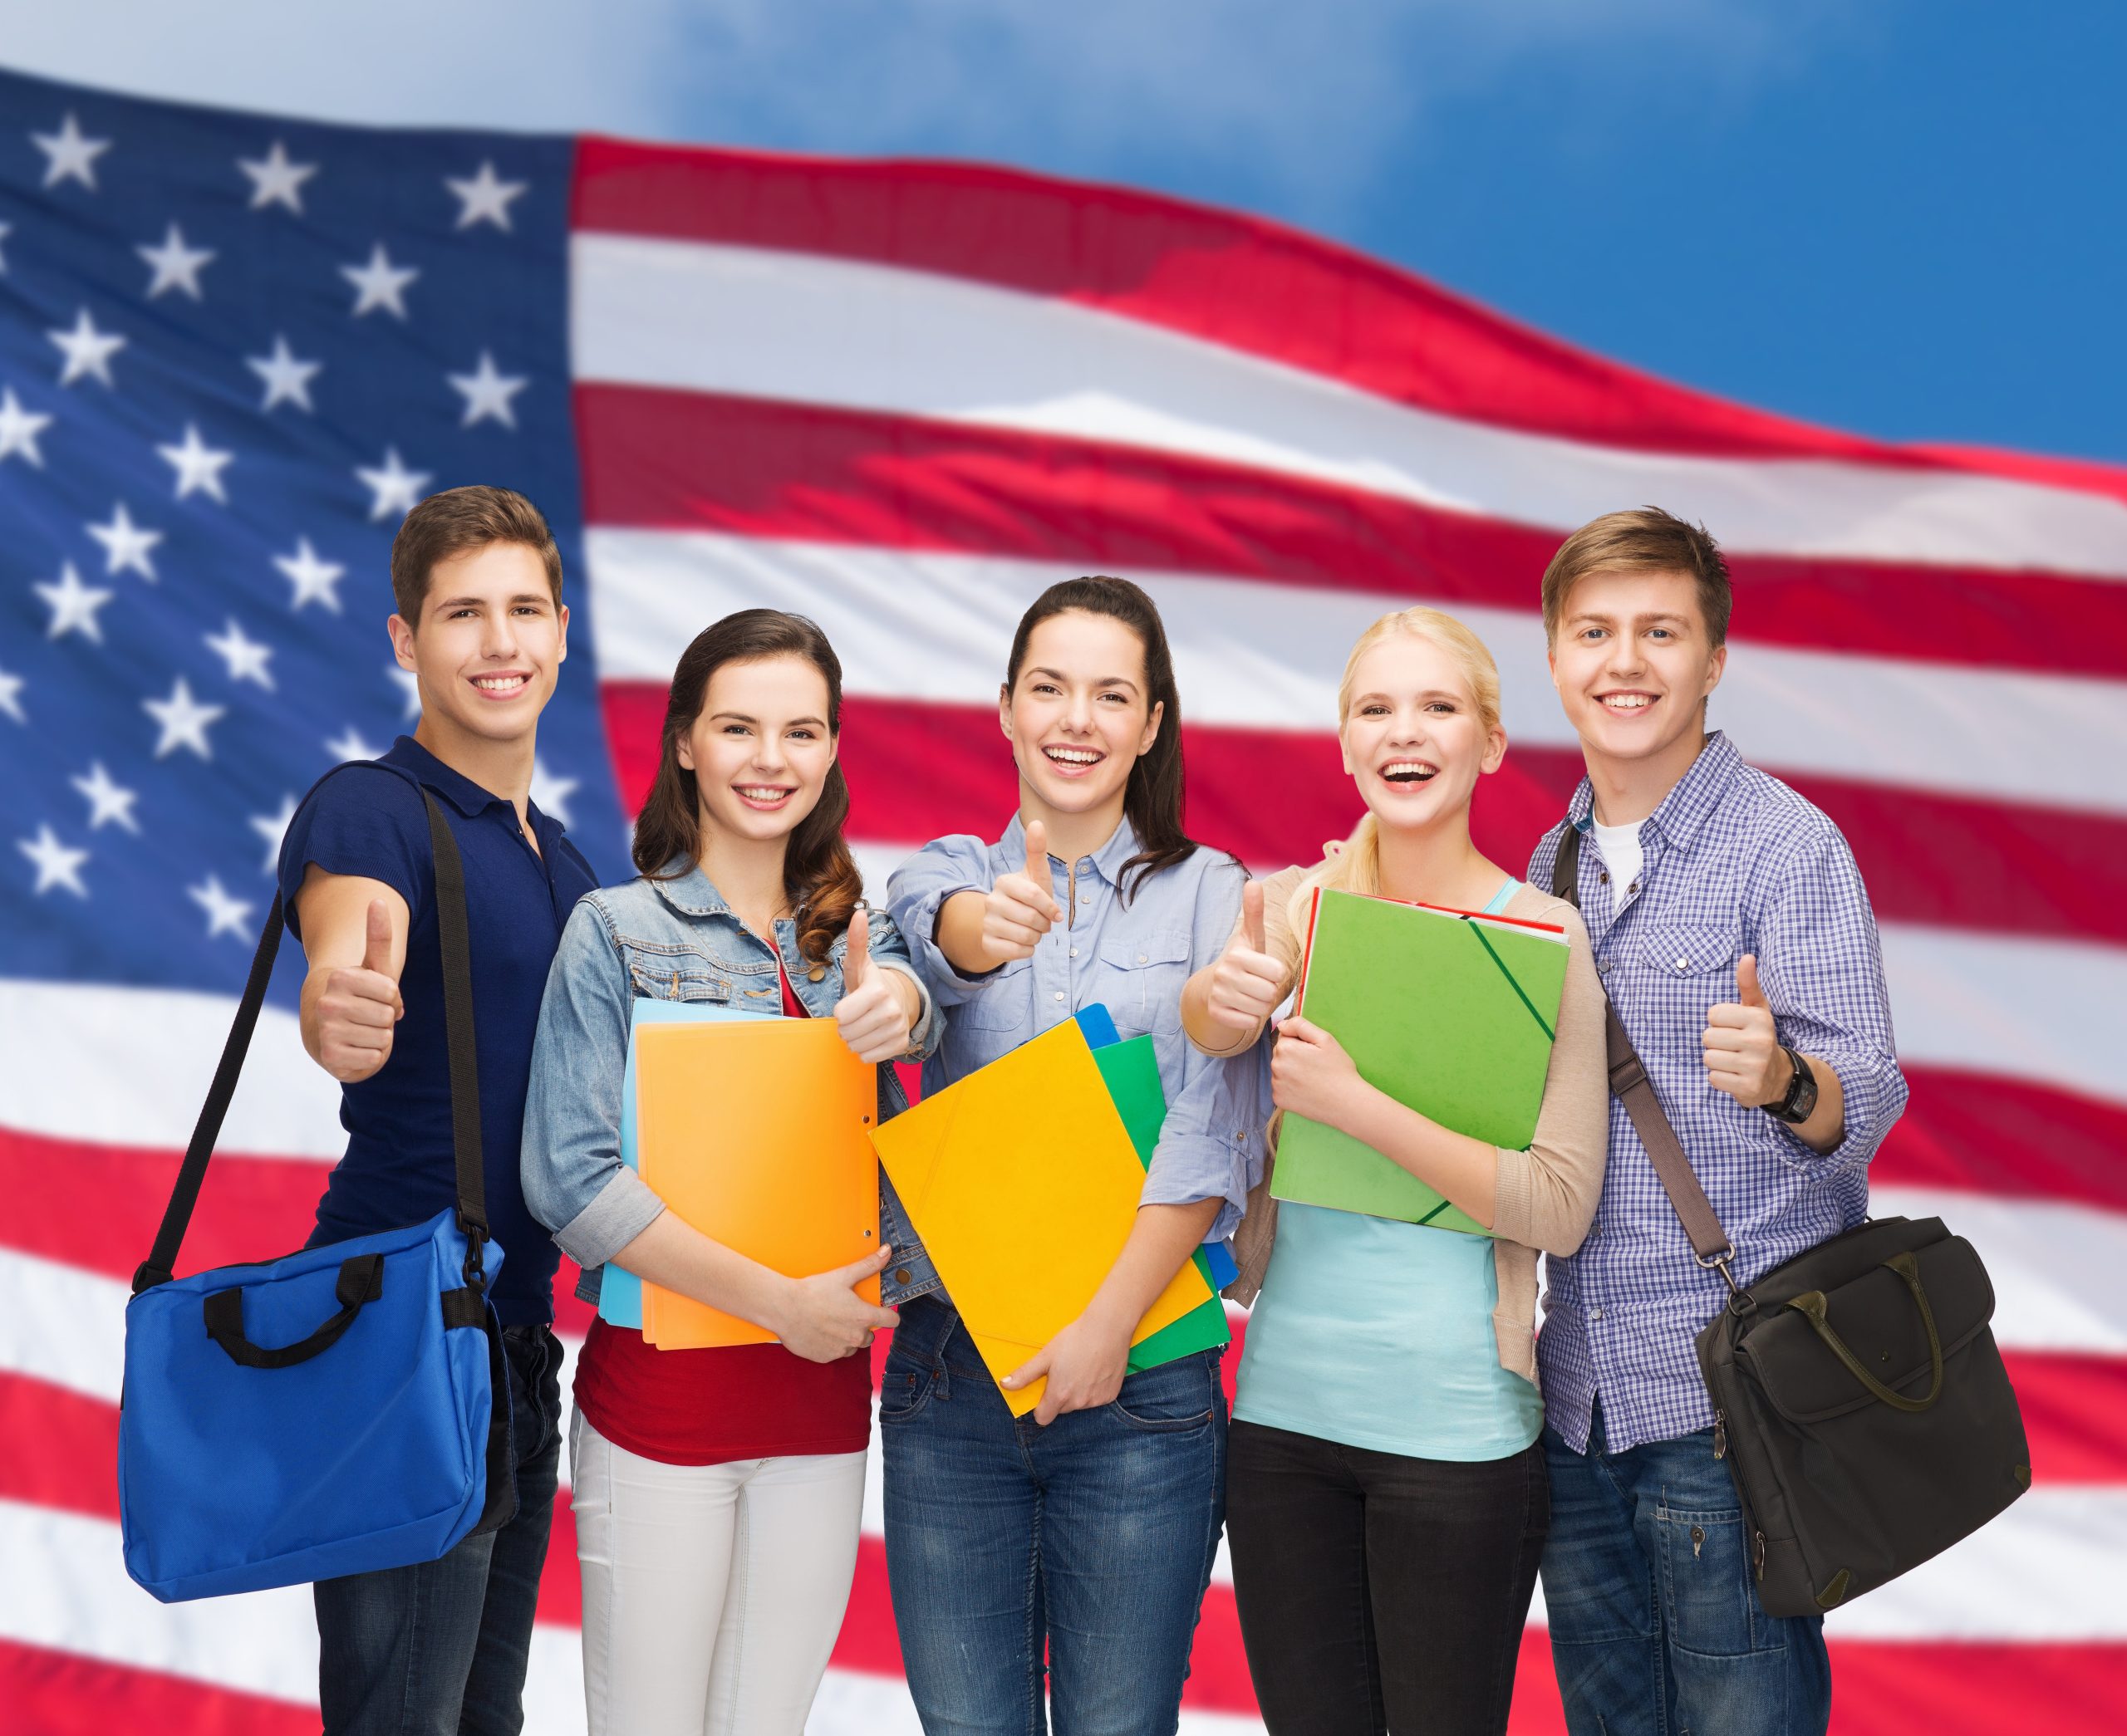 Higher Education in the USA: An Enriching Study Abroad Experience